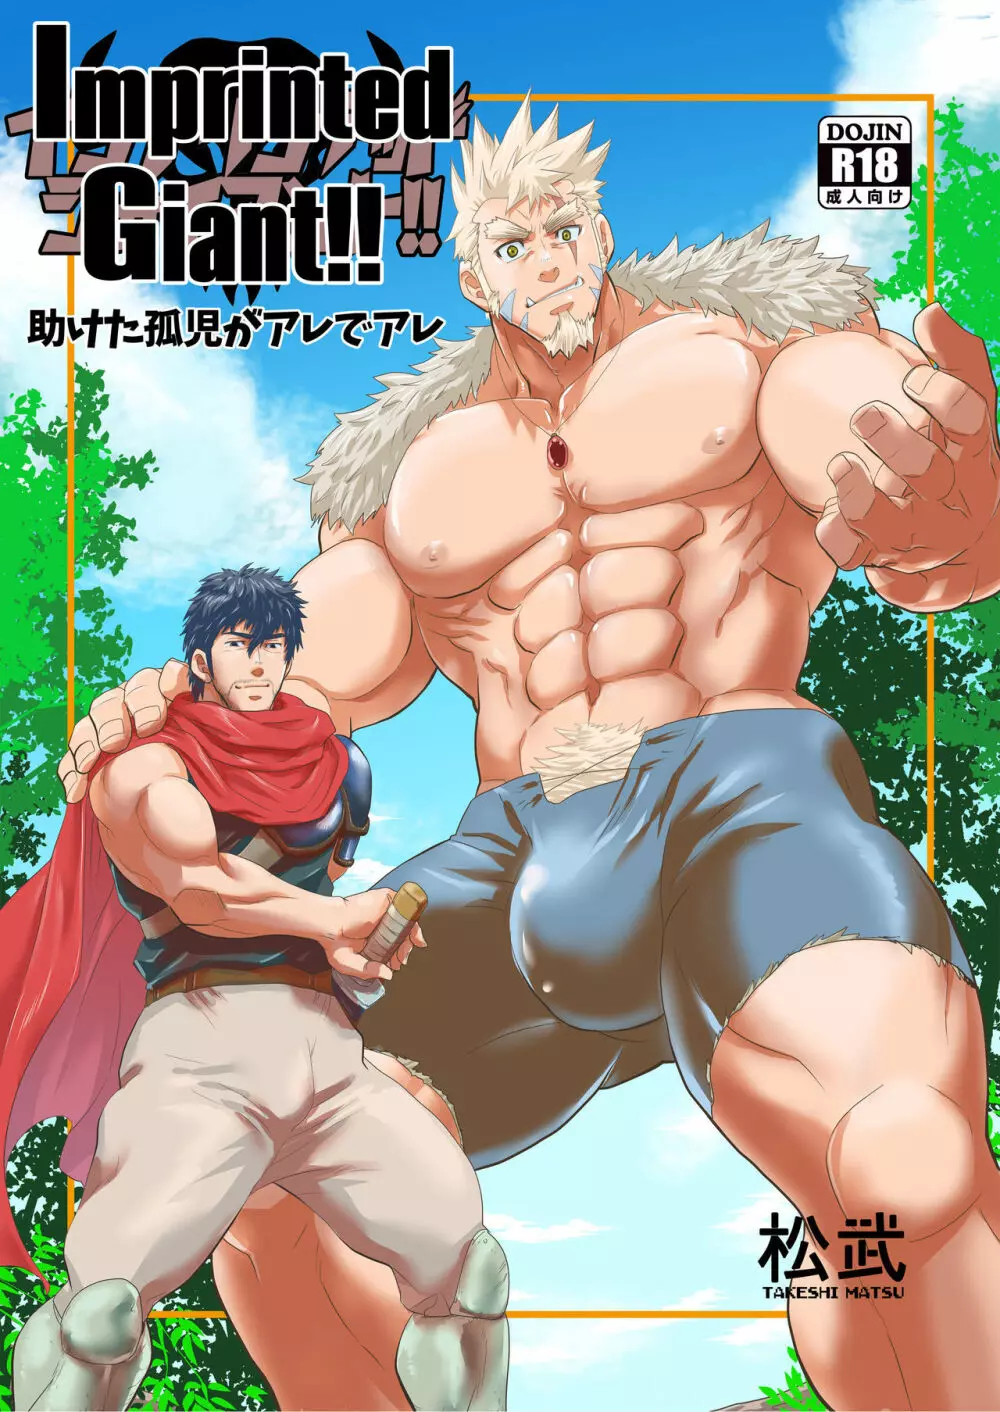 Imprinted Giant!! - page1